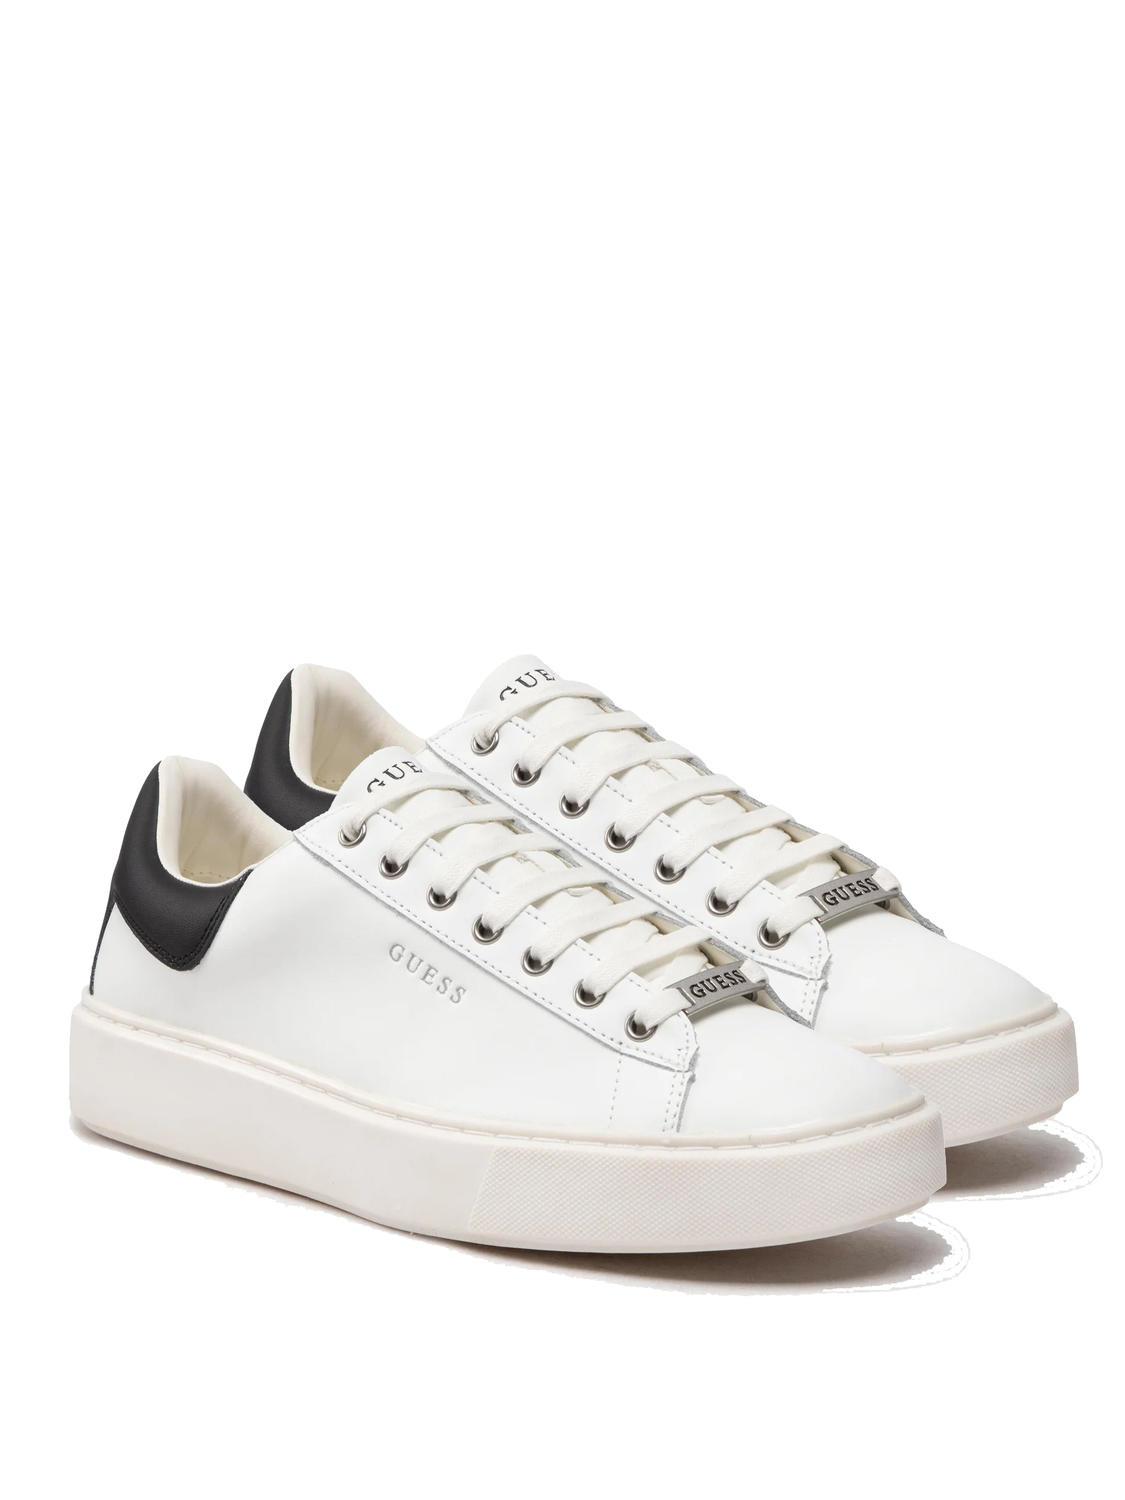 Basket femme Guess Vibo - Sneakers - Chaussures